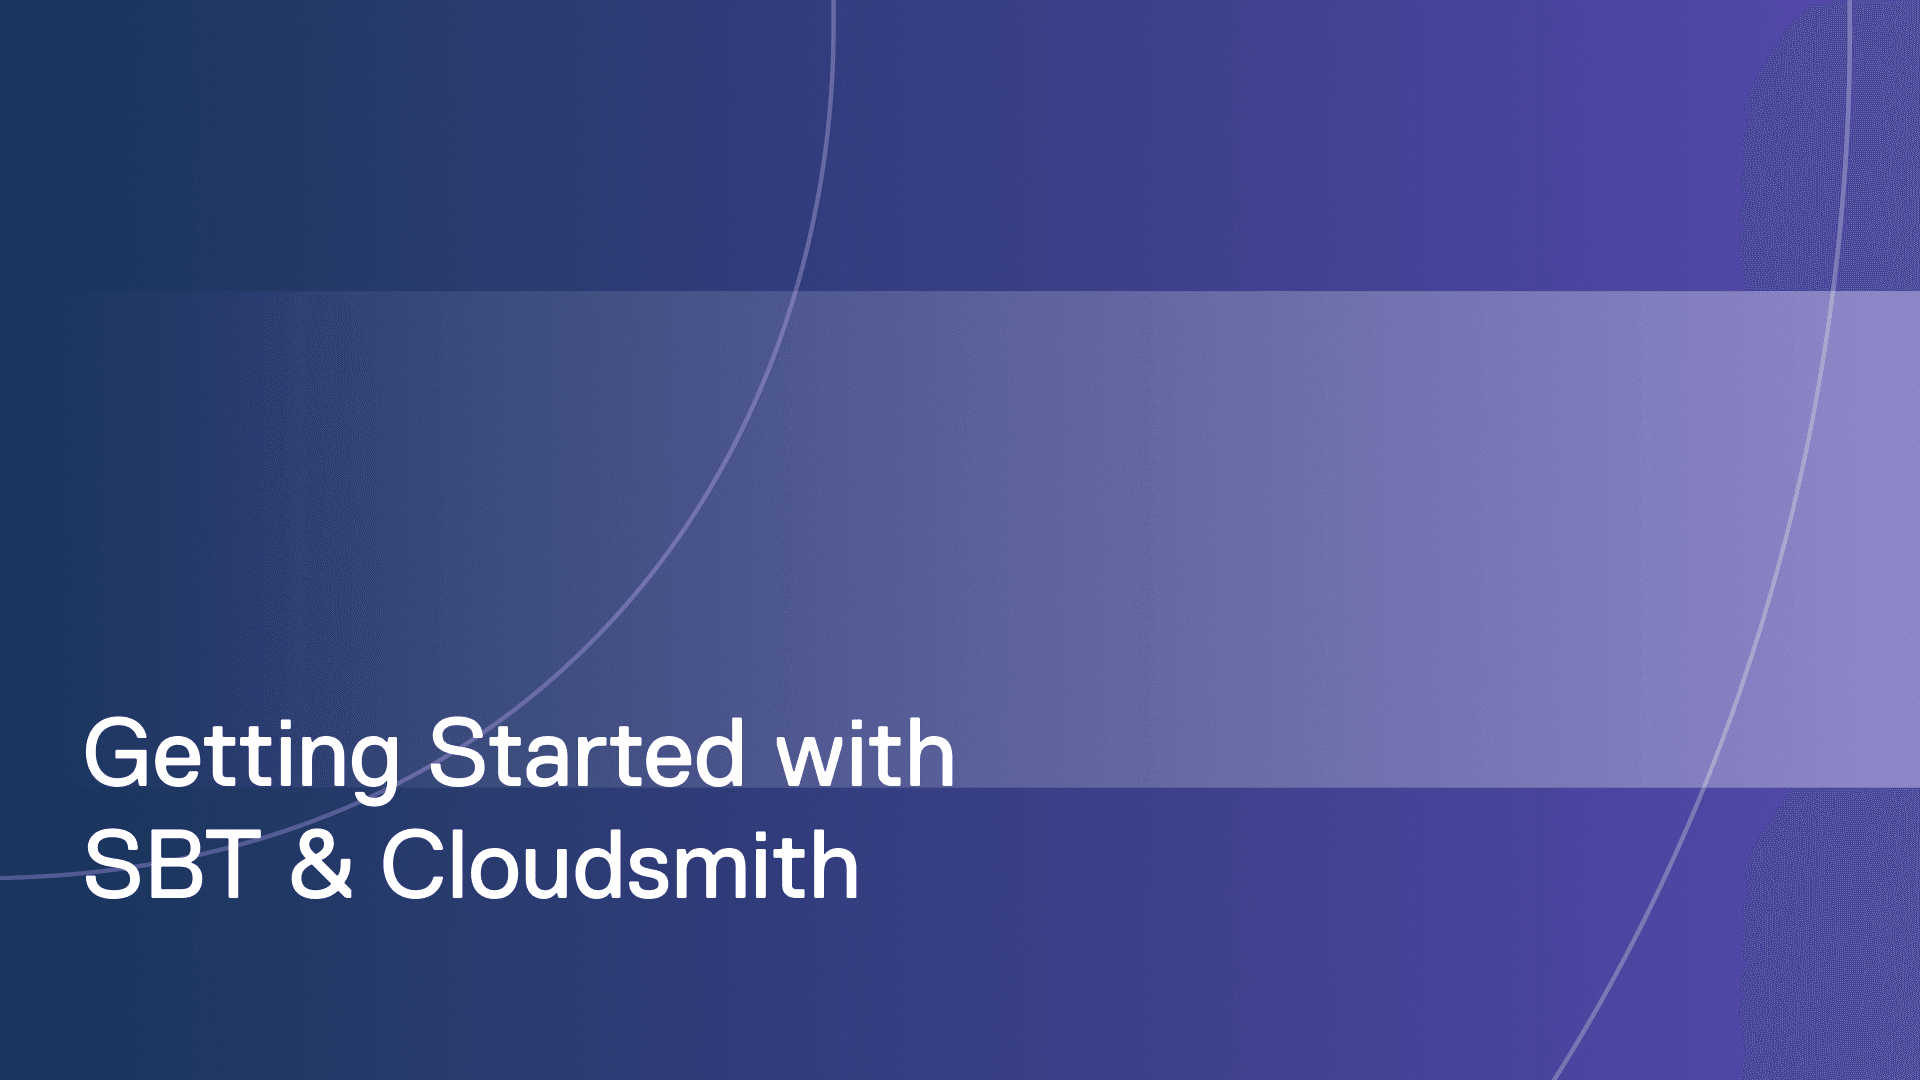 Getting started with SBT and Cloudsmith